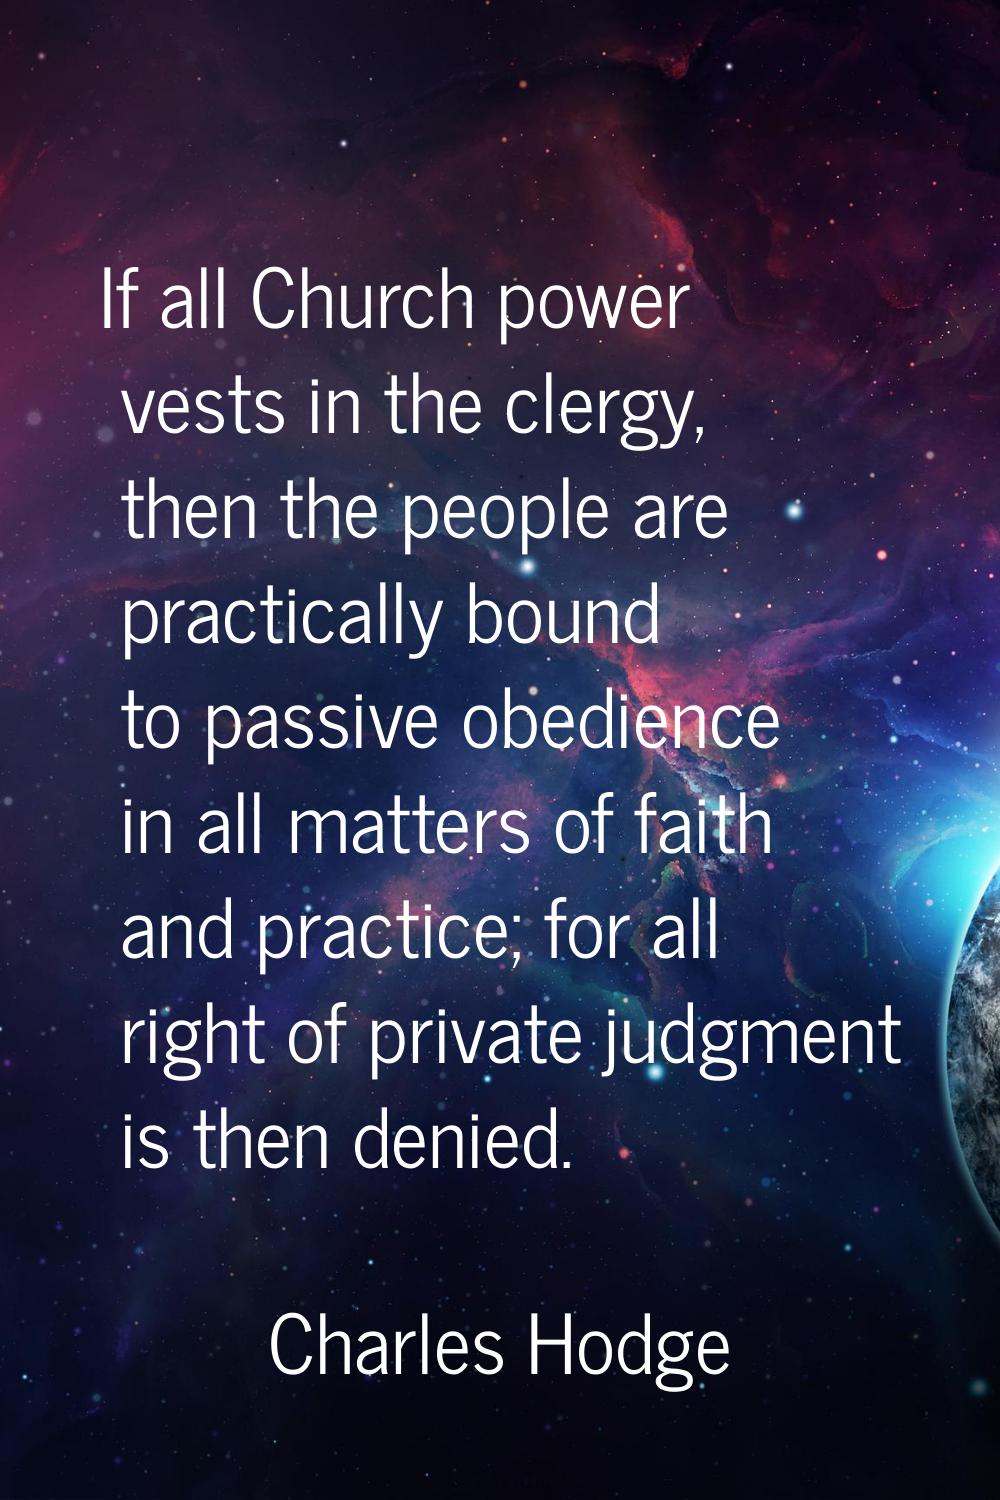 If all Church power vests in the clergy, then the people are practically bound to passive obedience